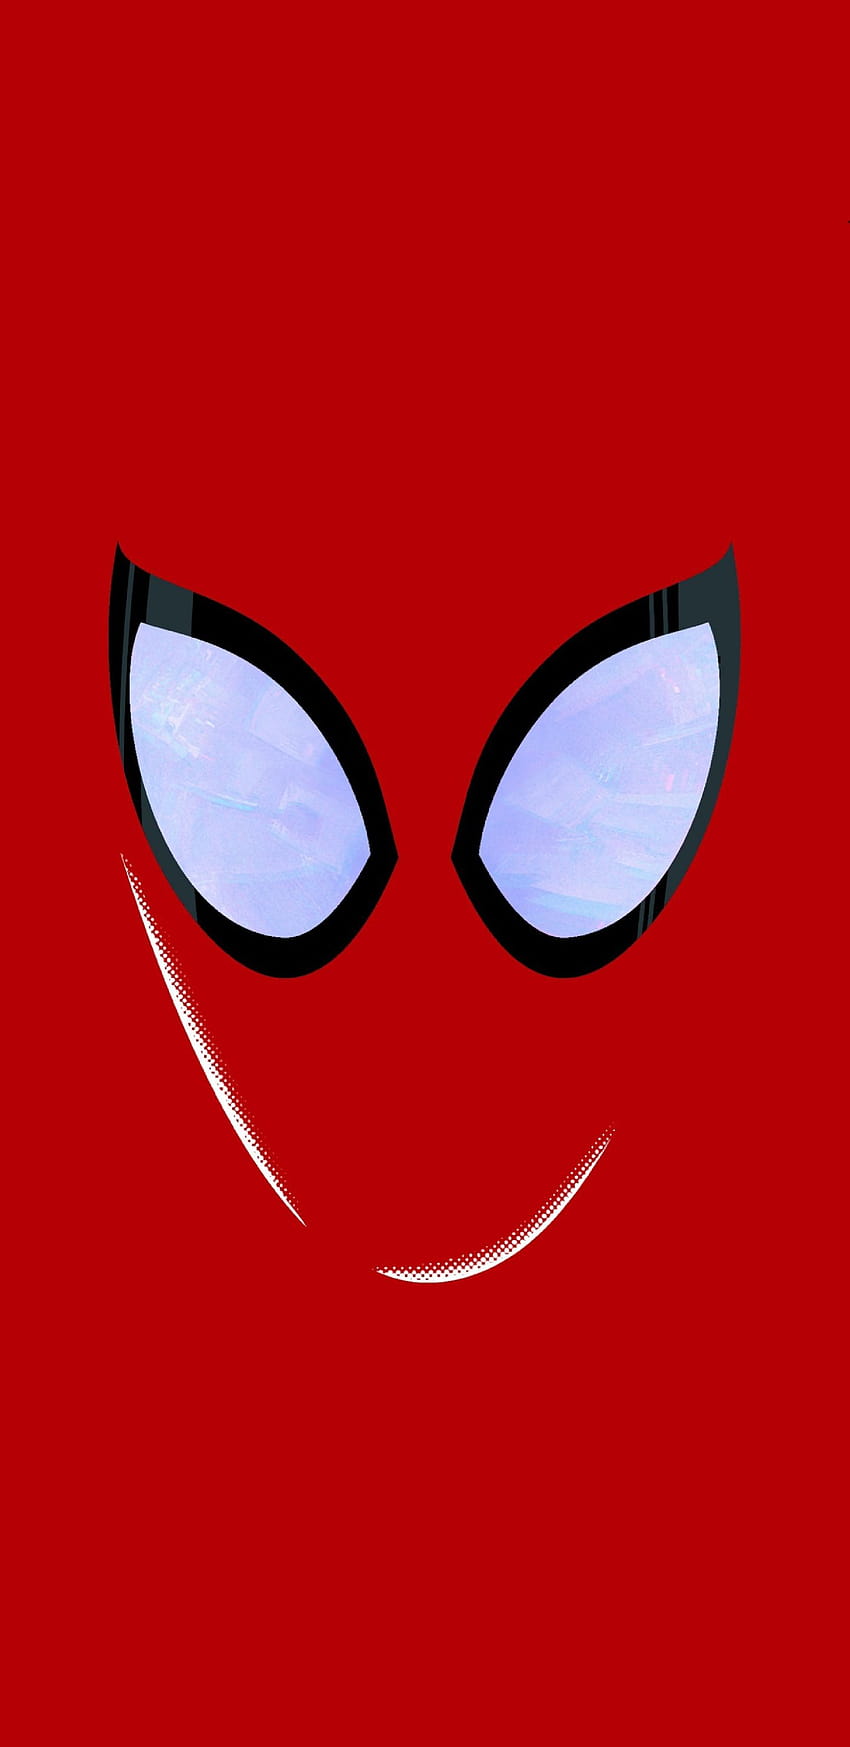 Made this for y'all : Spiderman, miles morales face HD phone wallpaper